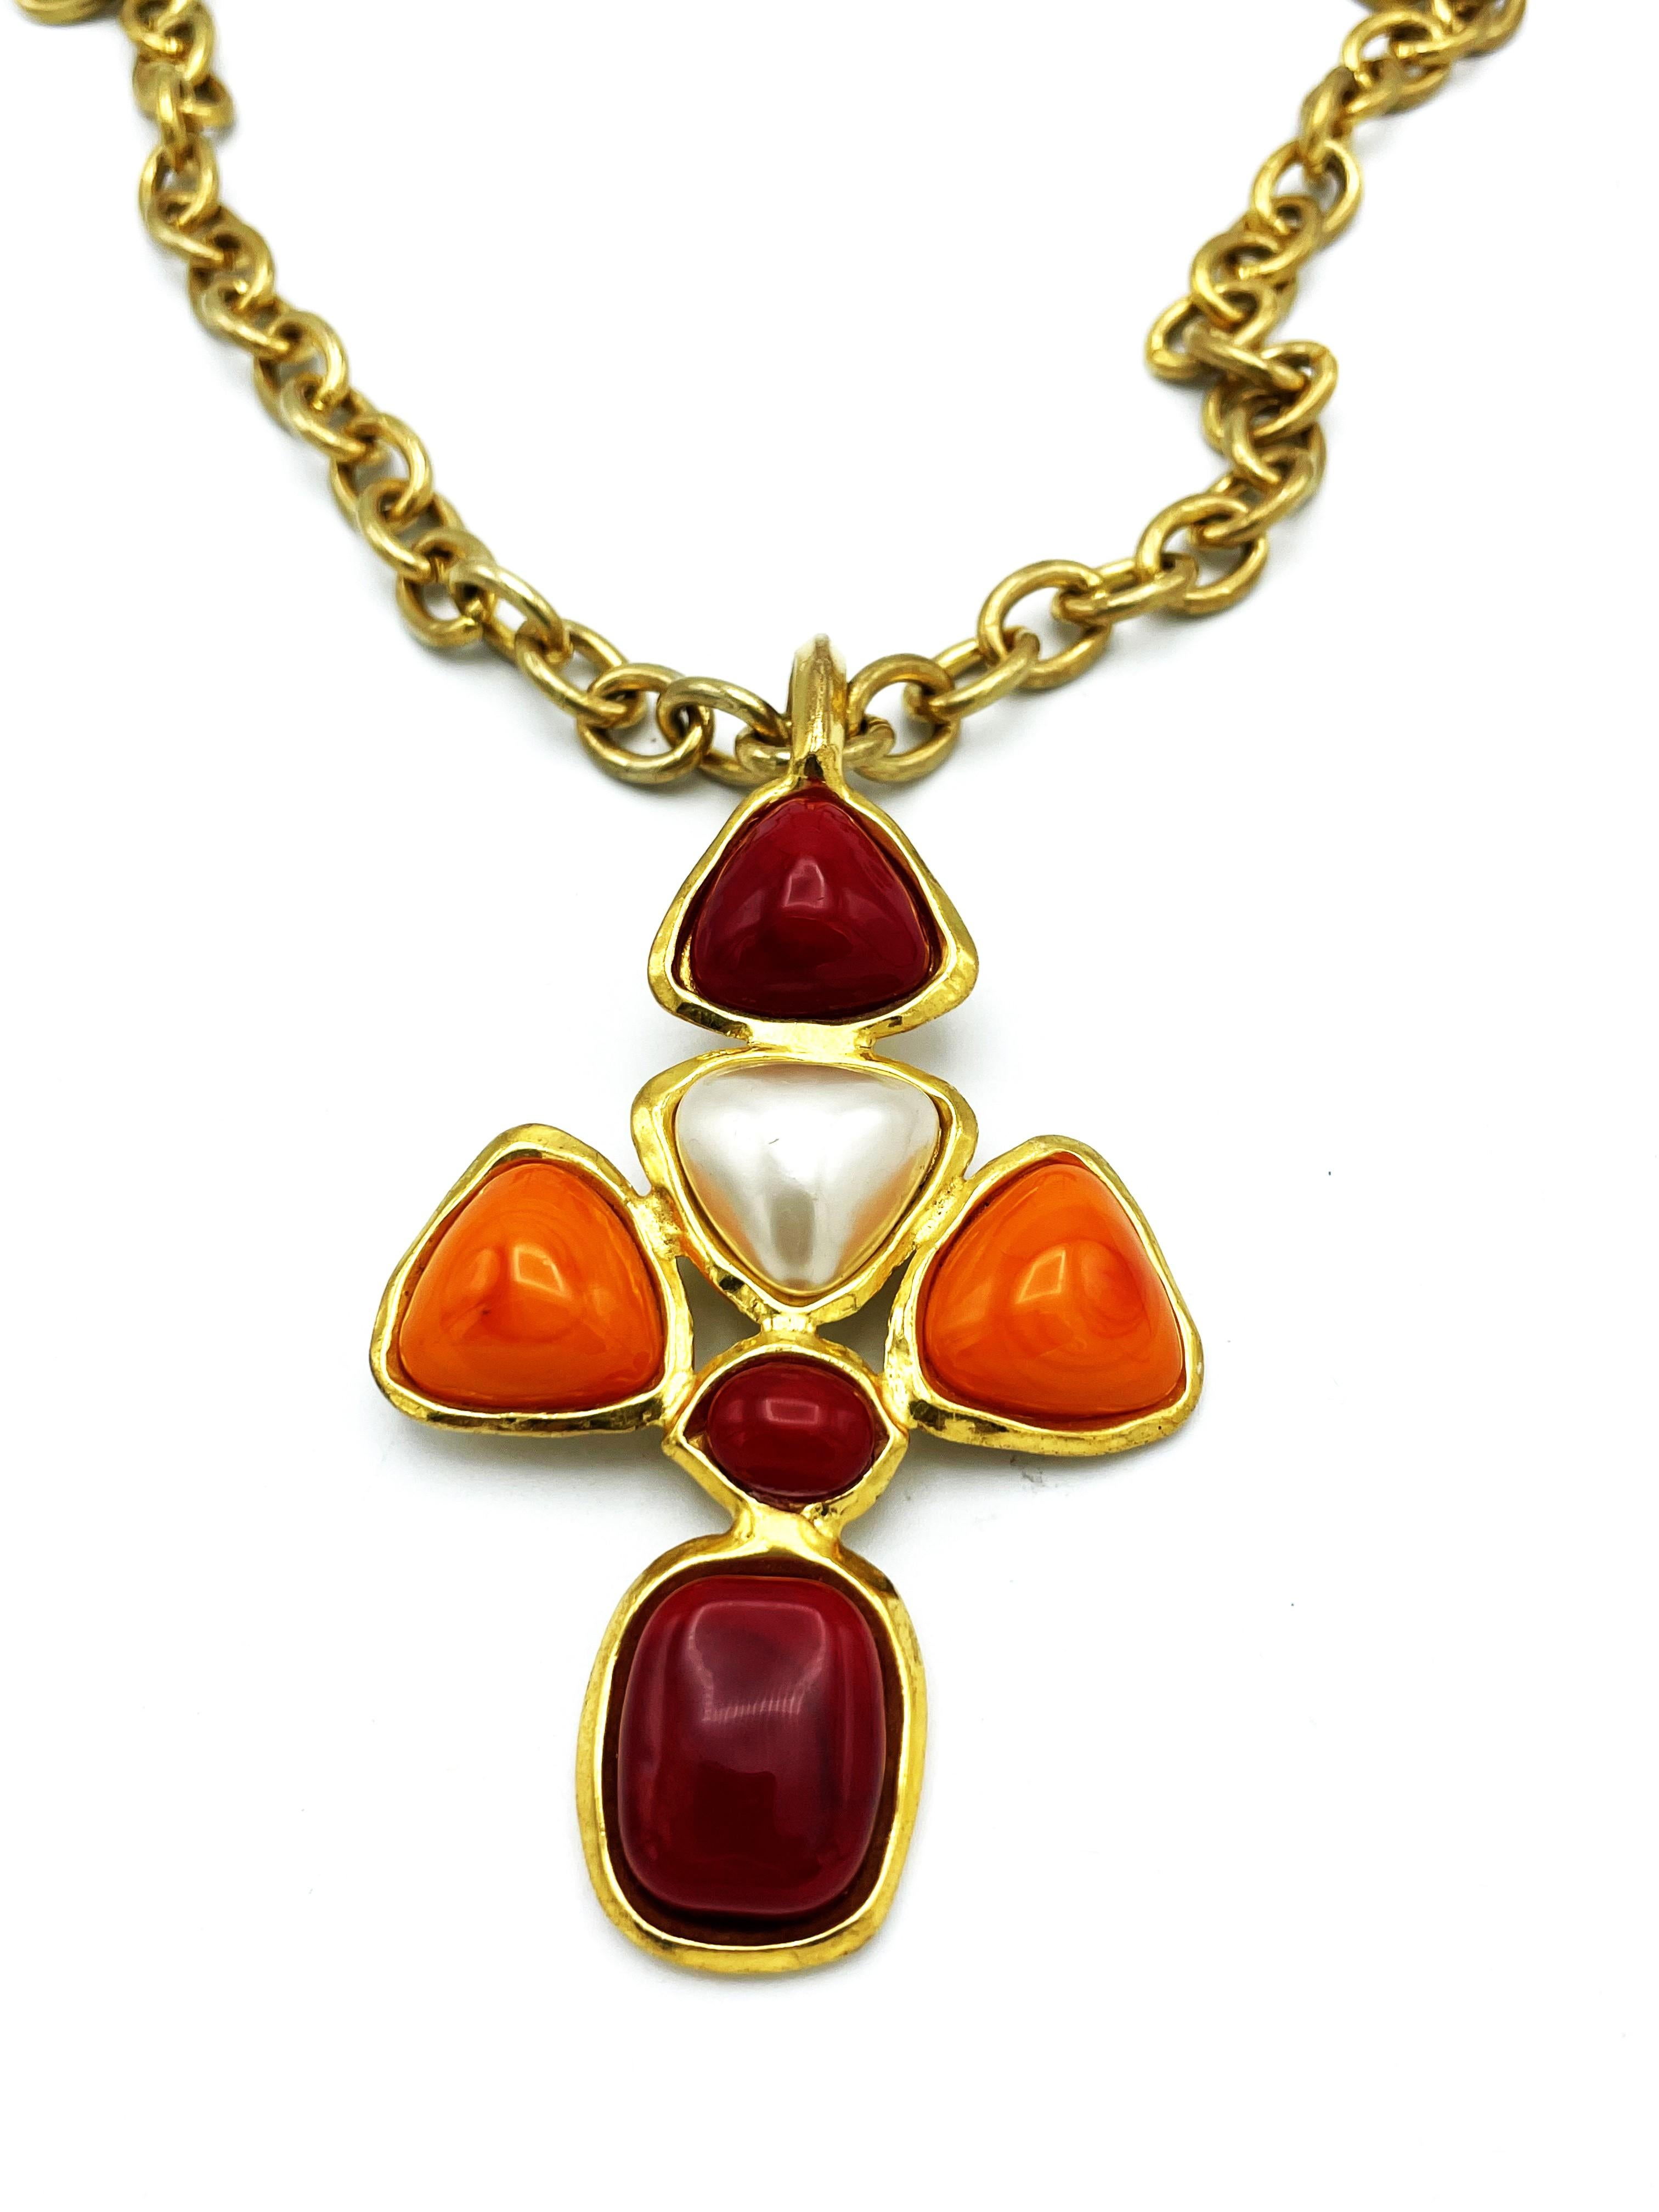 CHANEL CROSS NECKLACE wine red + orange Gripoix glass, faux pearl, signed 93 P In Excellent Condition For Sale In Stuttgart, DE